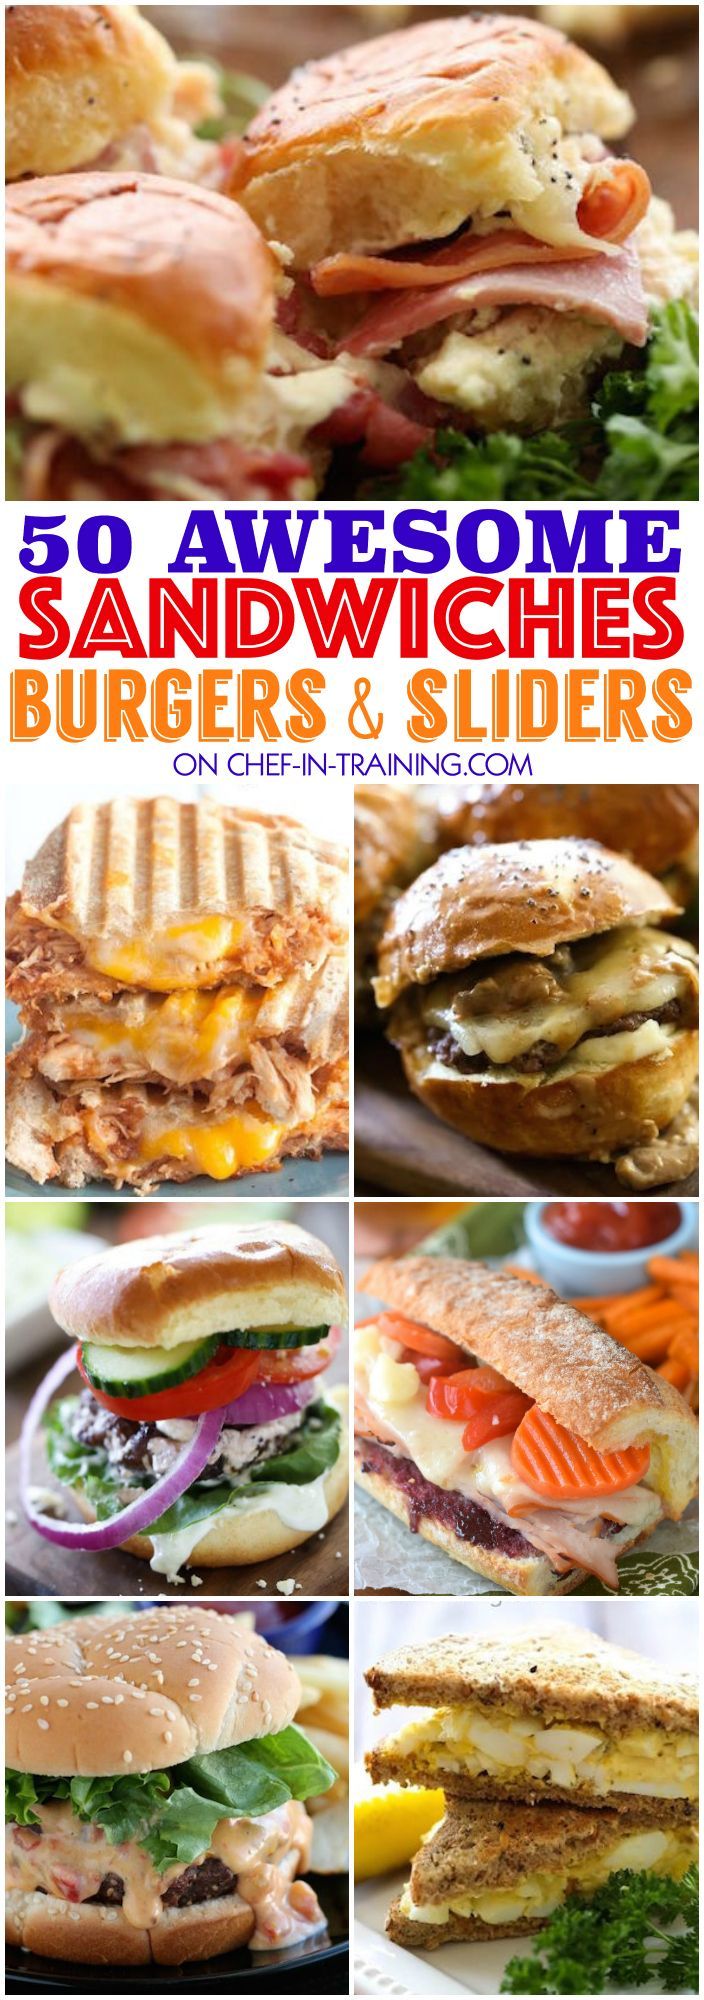 50 Awesome Sandwiches, Burgers and Sliders…. this list is the perfect GO TO for spring and summer! So many yummy unique and